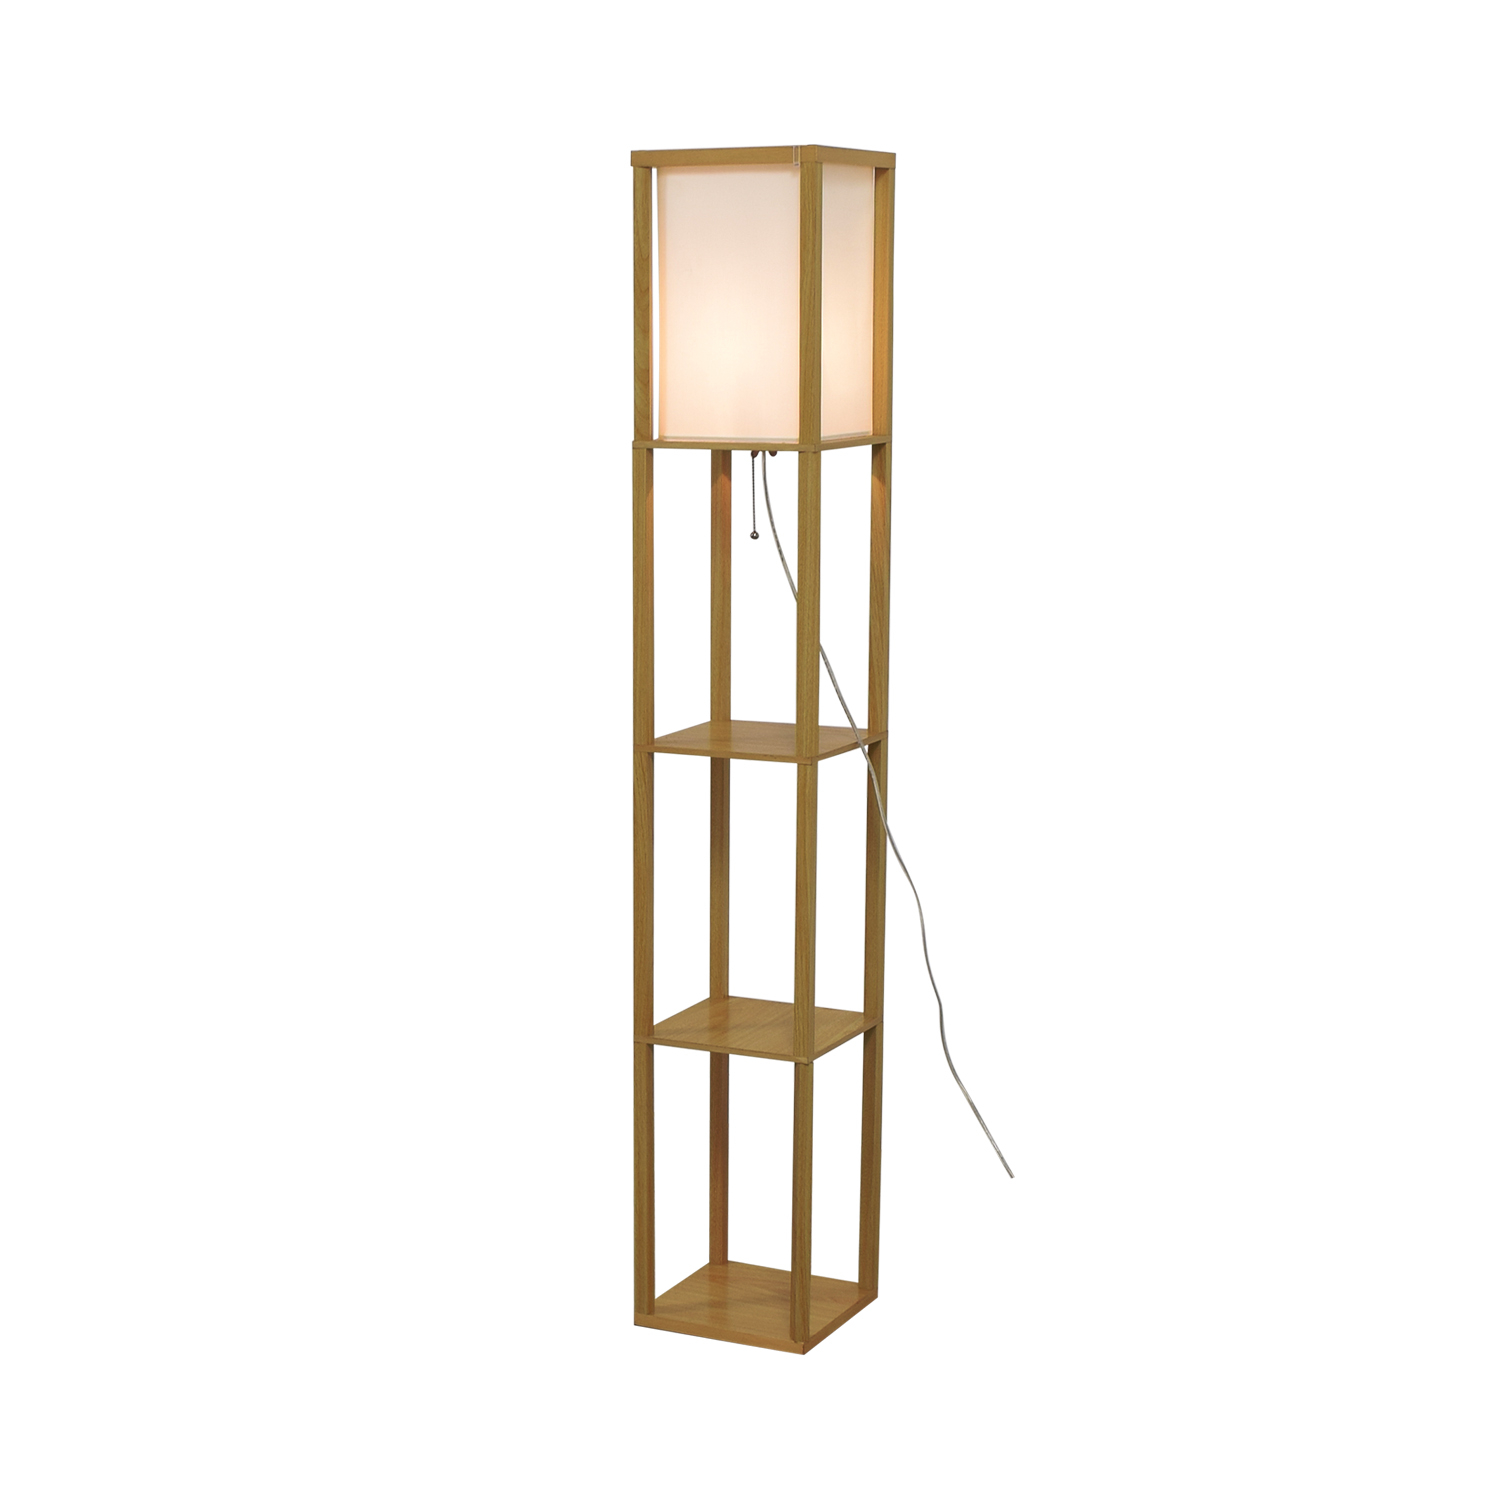 63 Off Lightaccents Light Accents Wooden Floor Lamp With Linen Shade Decor regarding dimensions 1500 X 1500